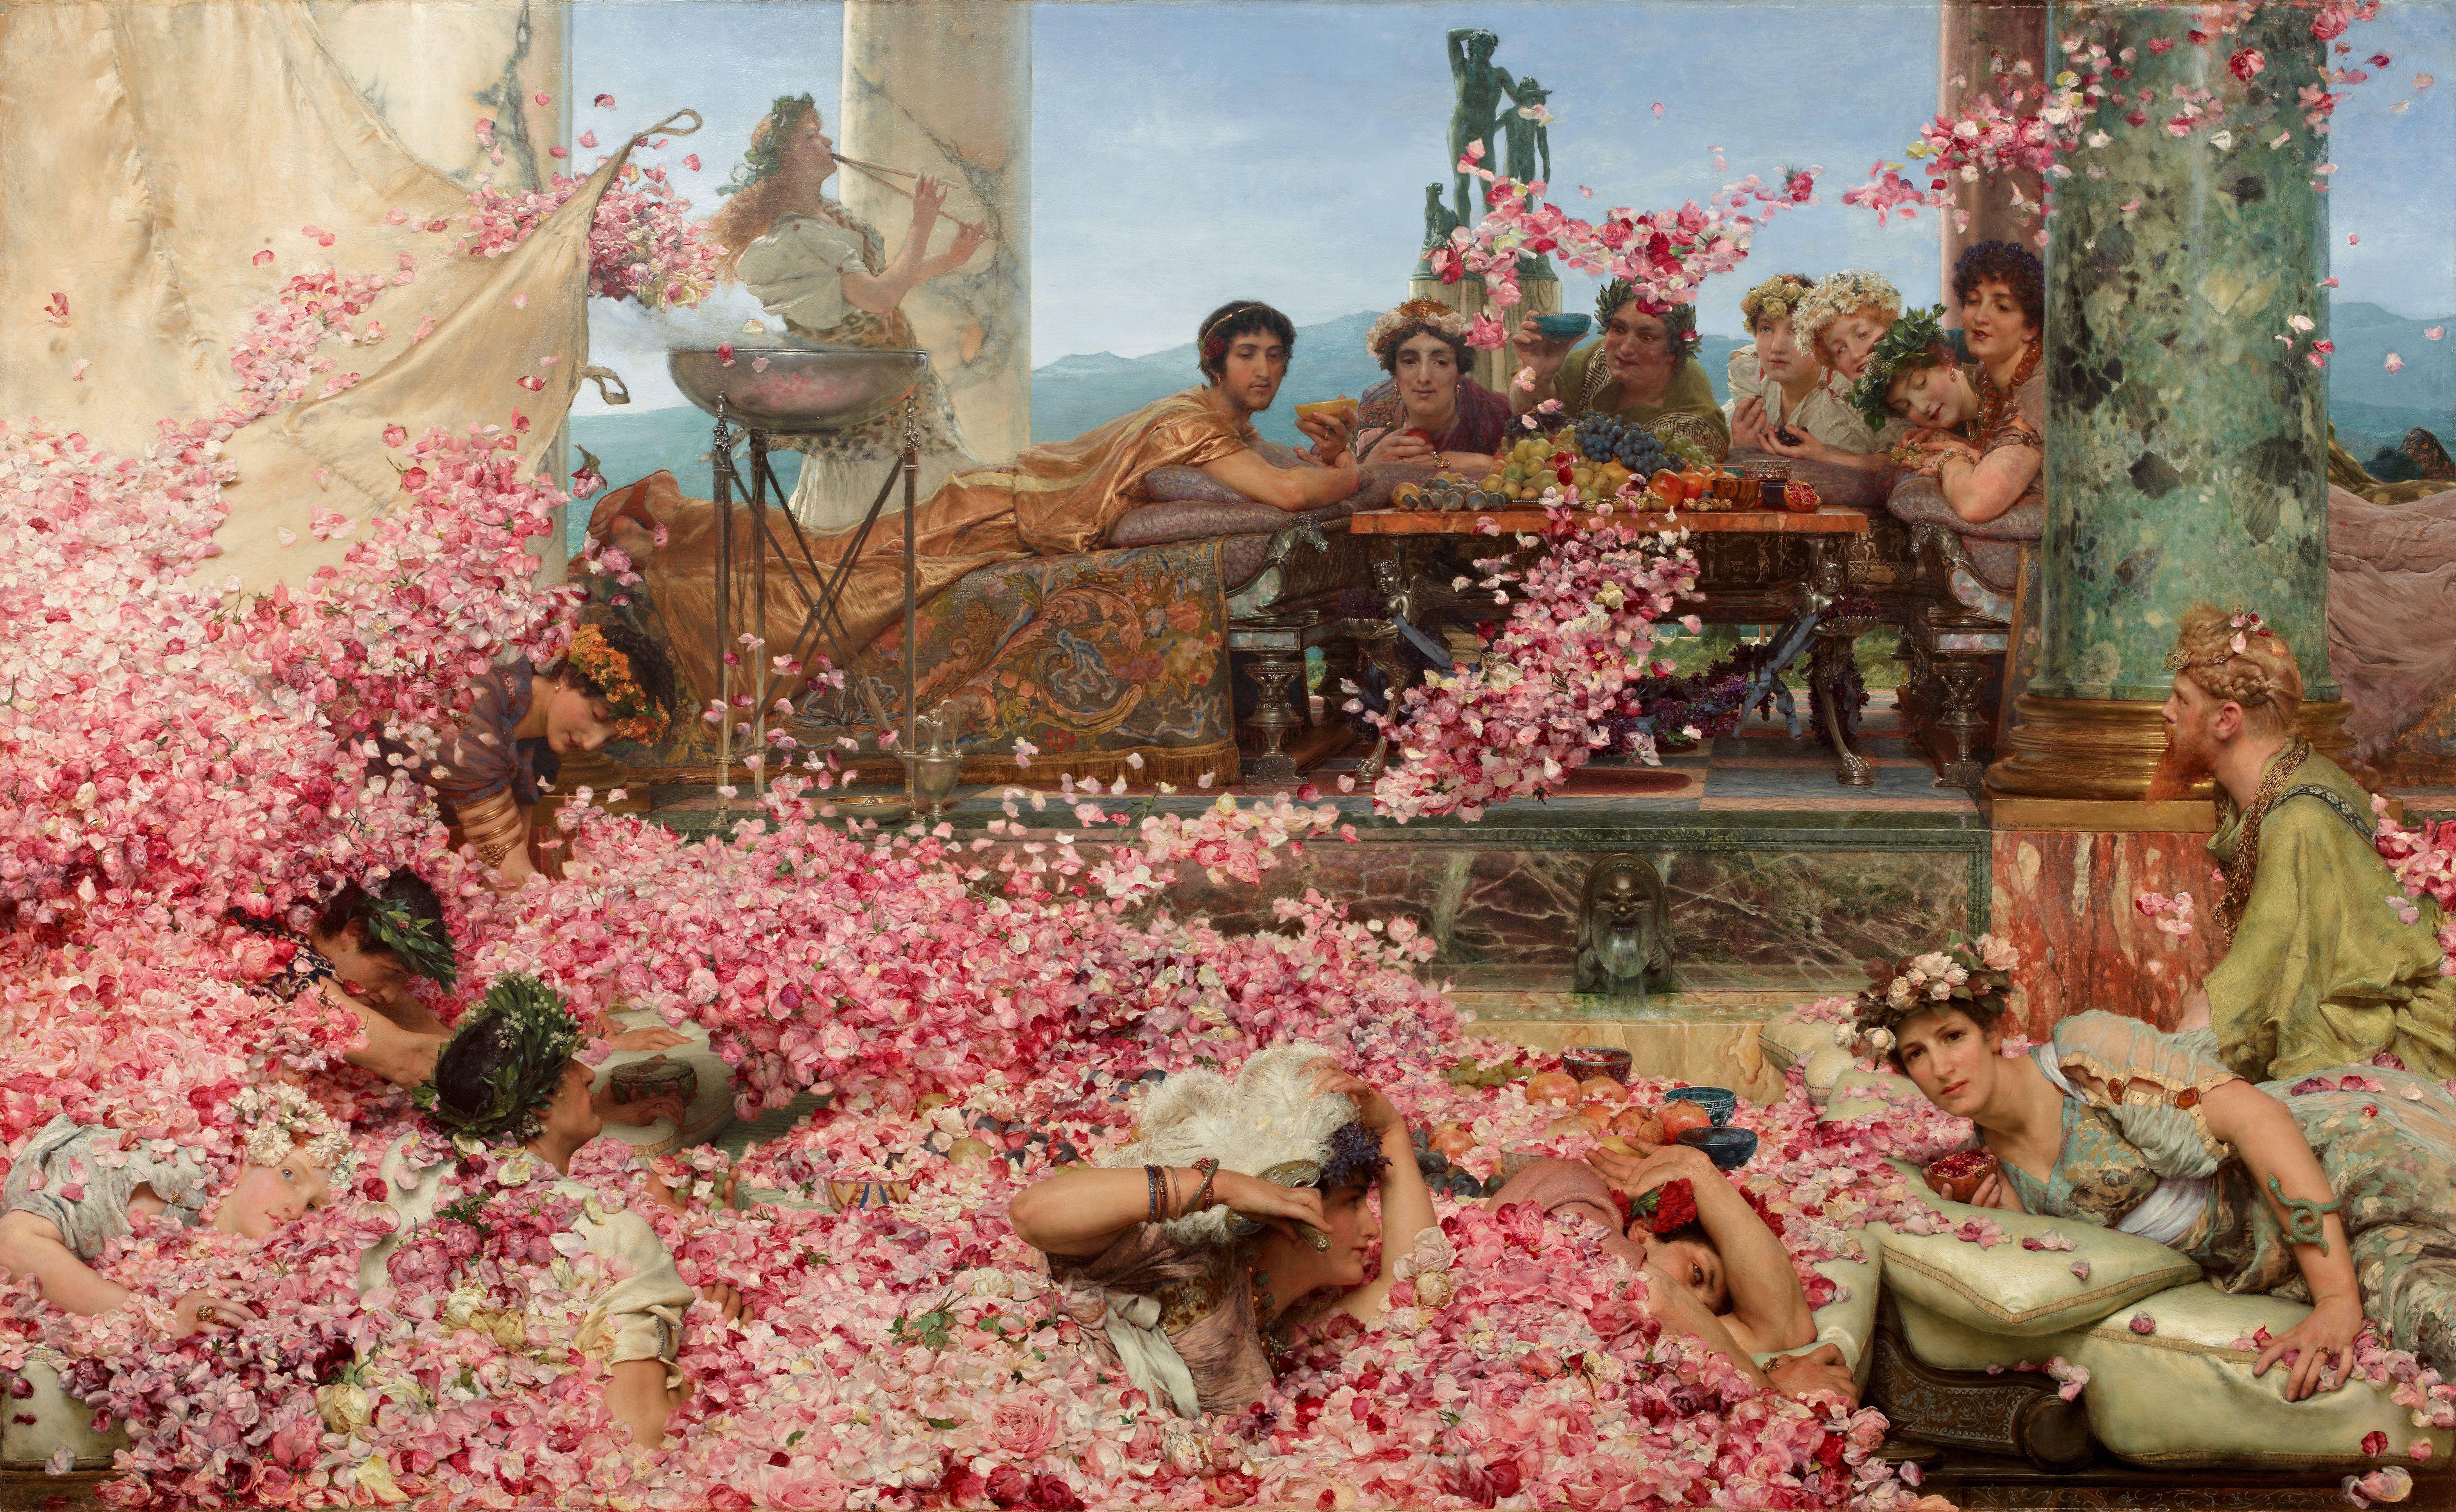 An evocative depiction of the decadence of scent in the Roman era. "Rose of Heliobalus" by Lawrence Alma-Tadema, 